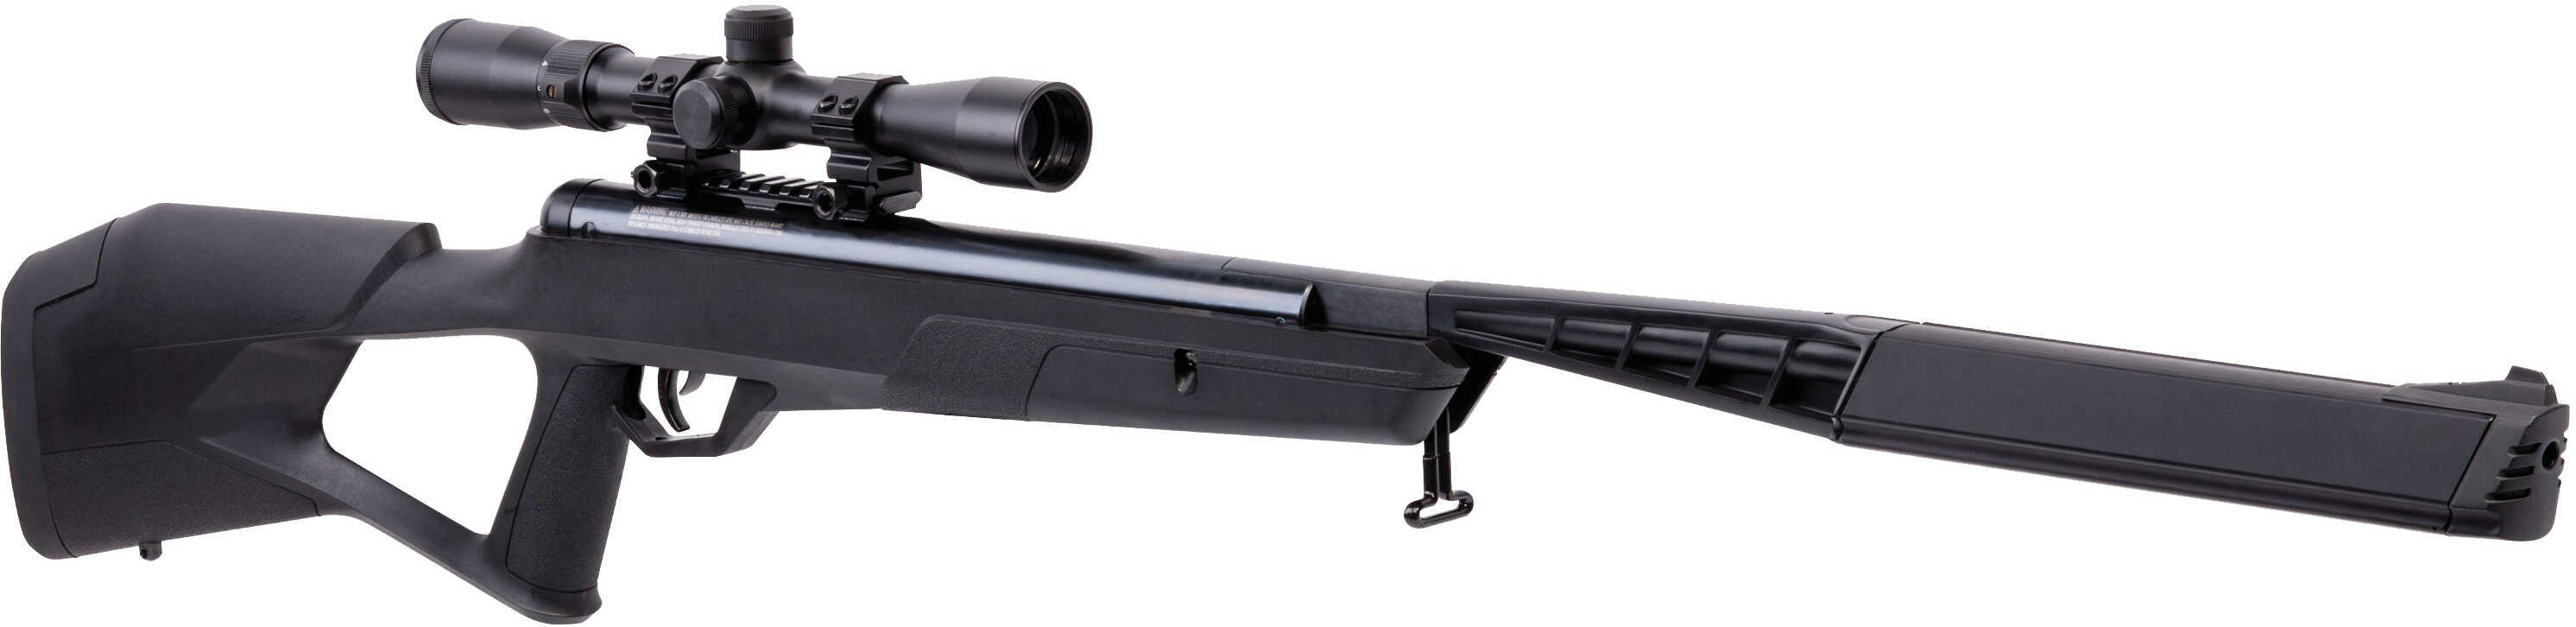 Benjamin Sheridan Trail NP2 Stealth Air Rifle, .177 Caliber with 3-9x32mm Scope, Synthetic Stock Md: BTN2Q7SX